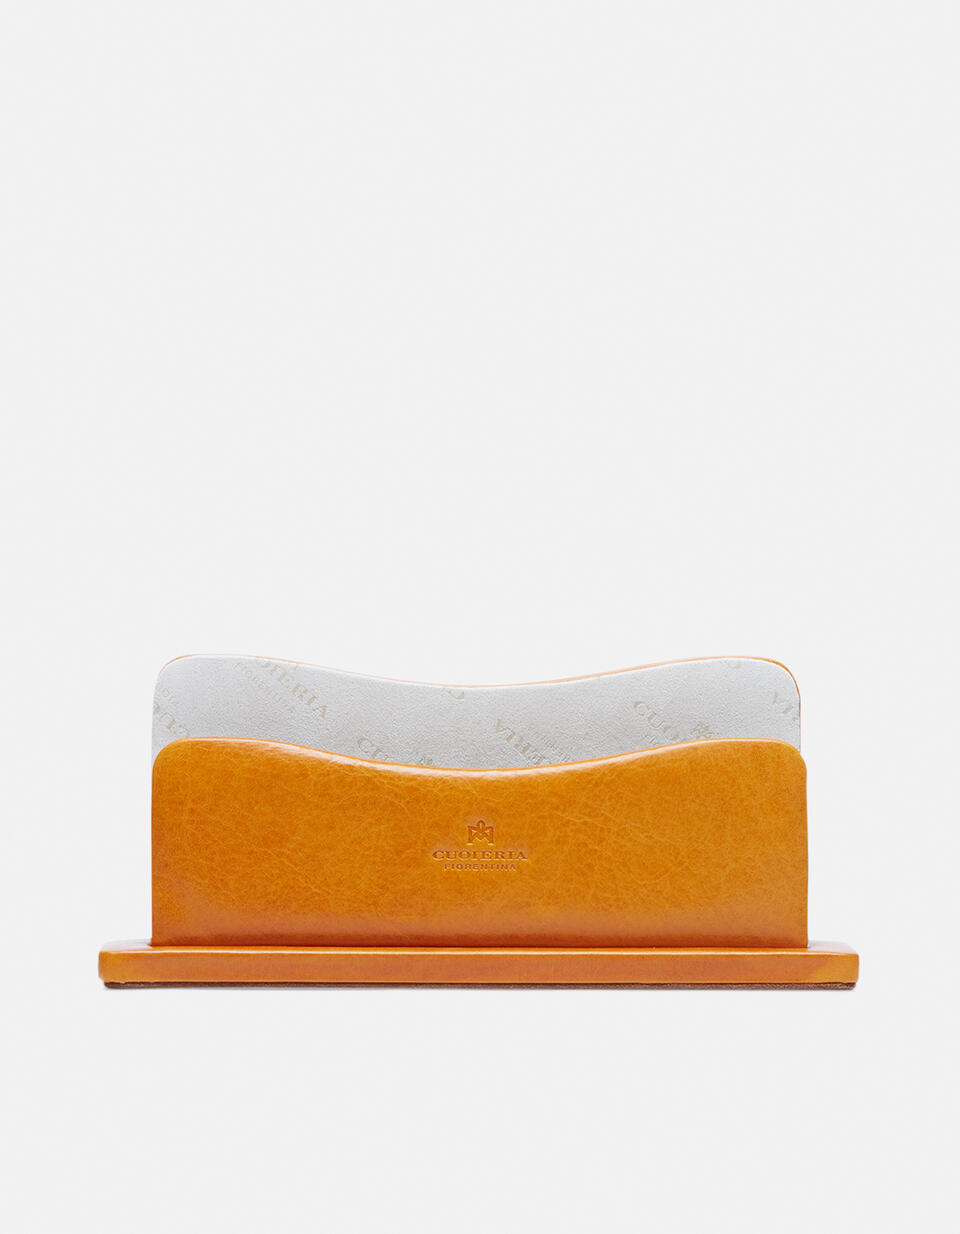 Vegetable tanned leather letter holder GIALLO  - Office - Accessories - Cuoieria Fiorentina